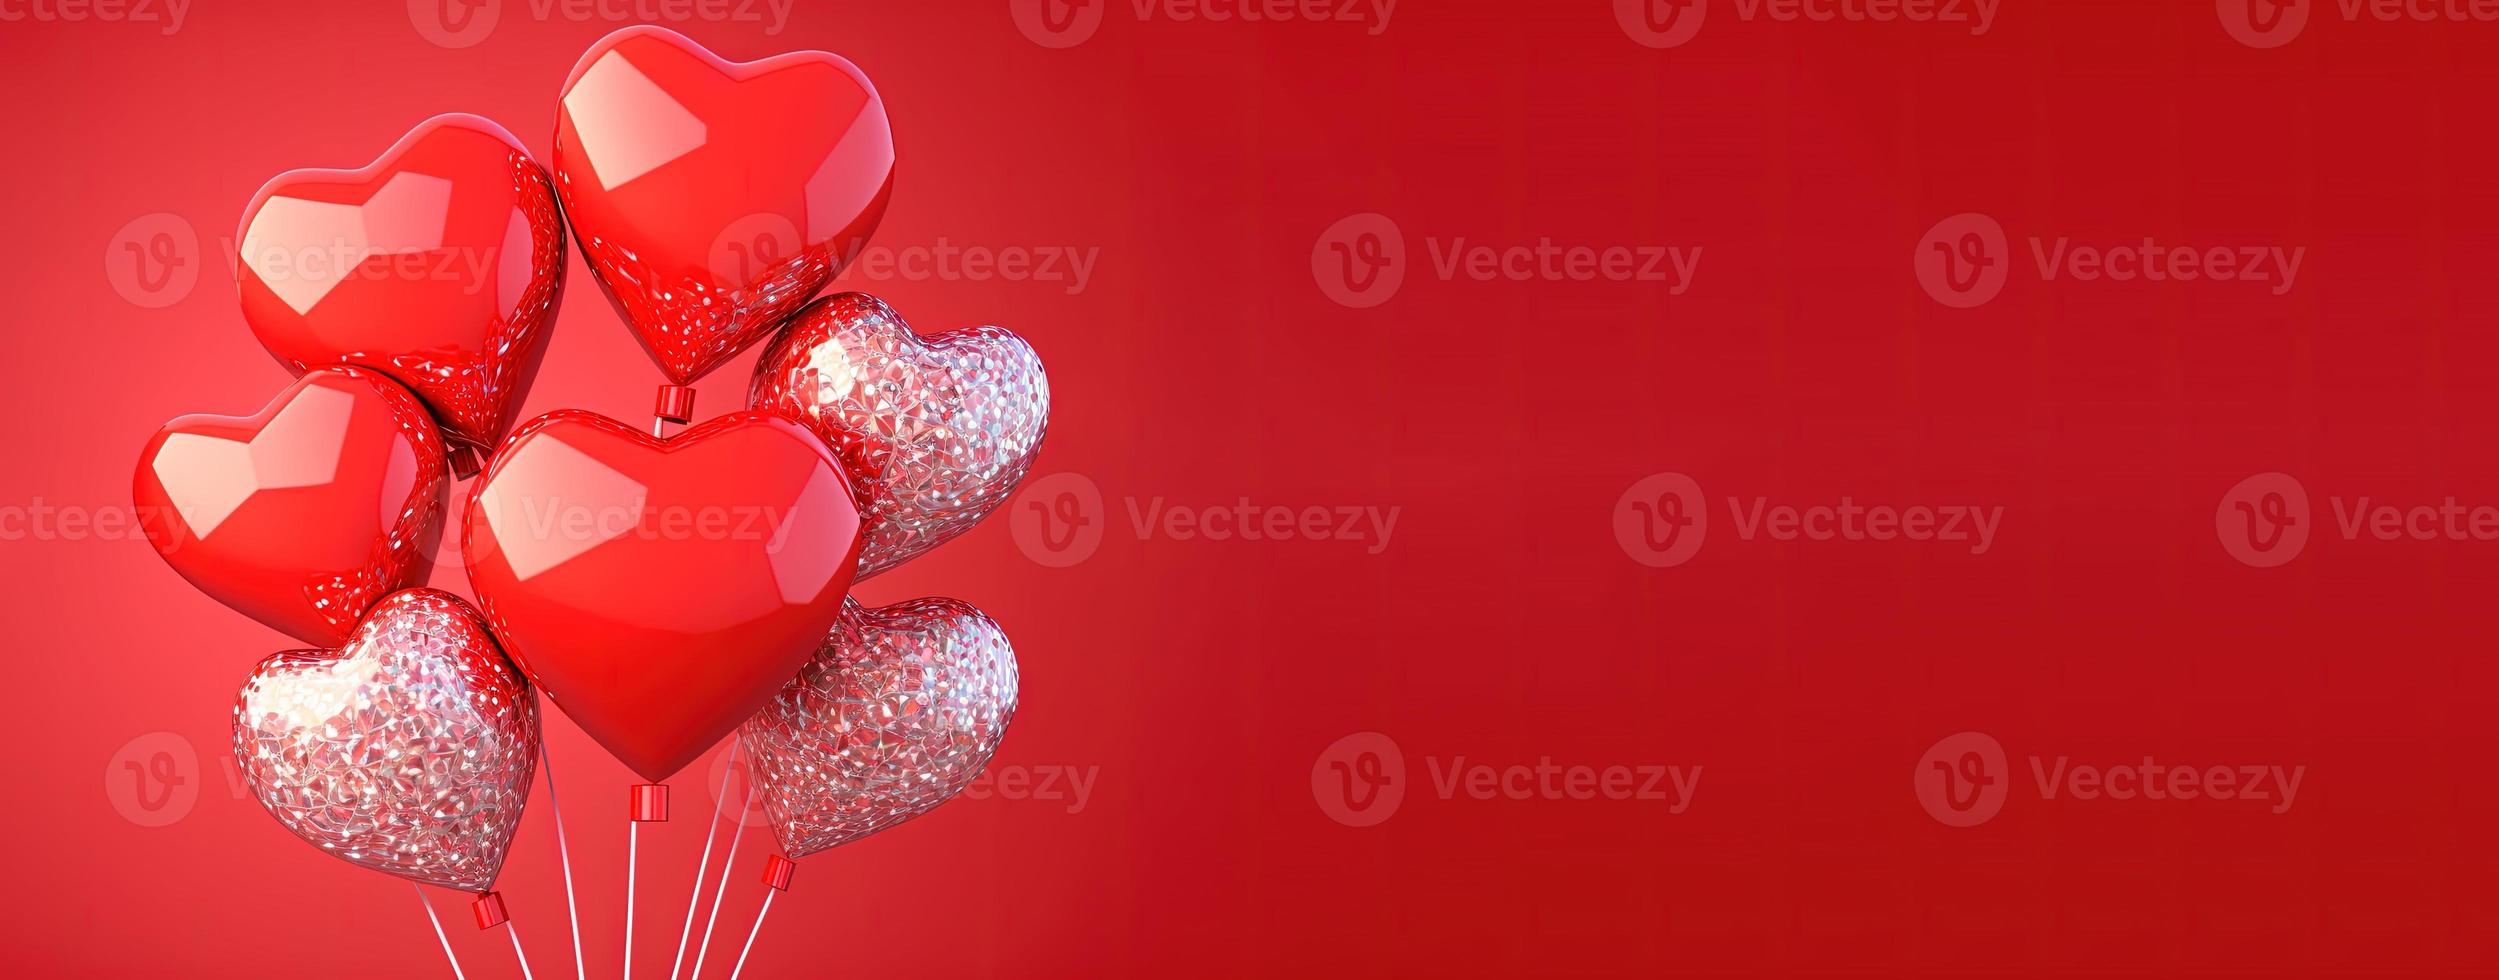 Happy valentines day banner background with shiny red 3d heart shape photo